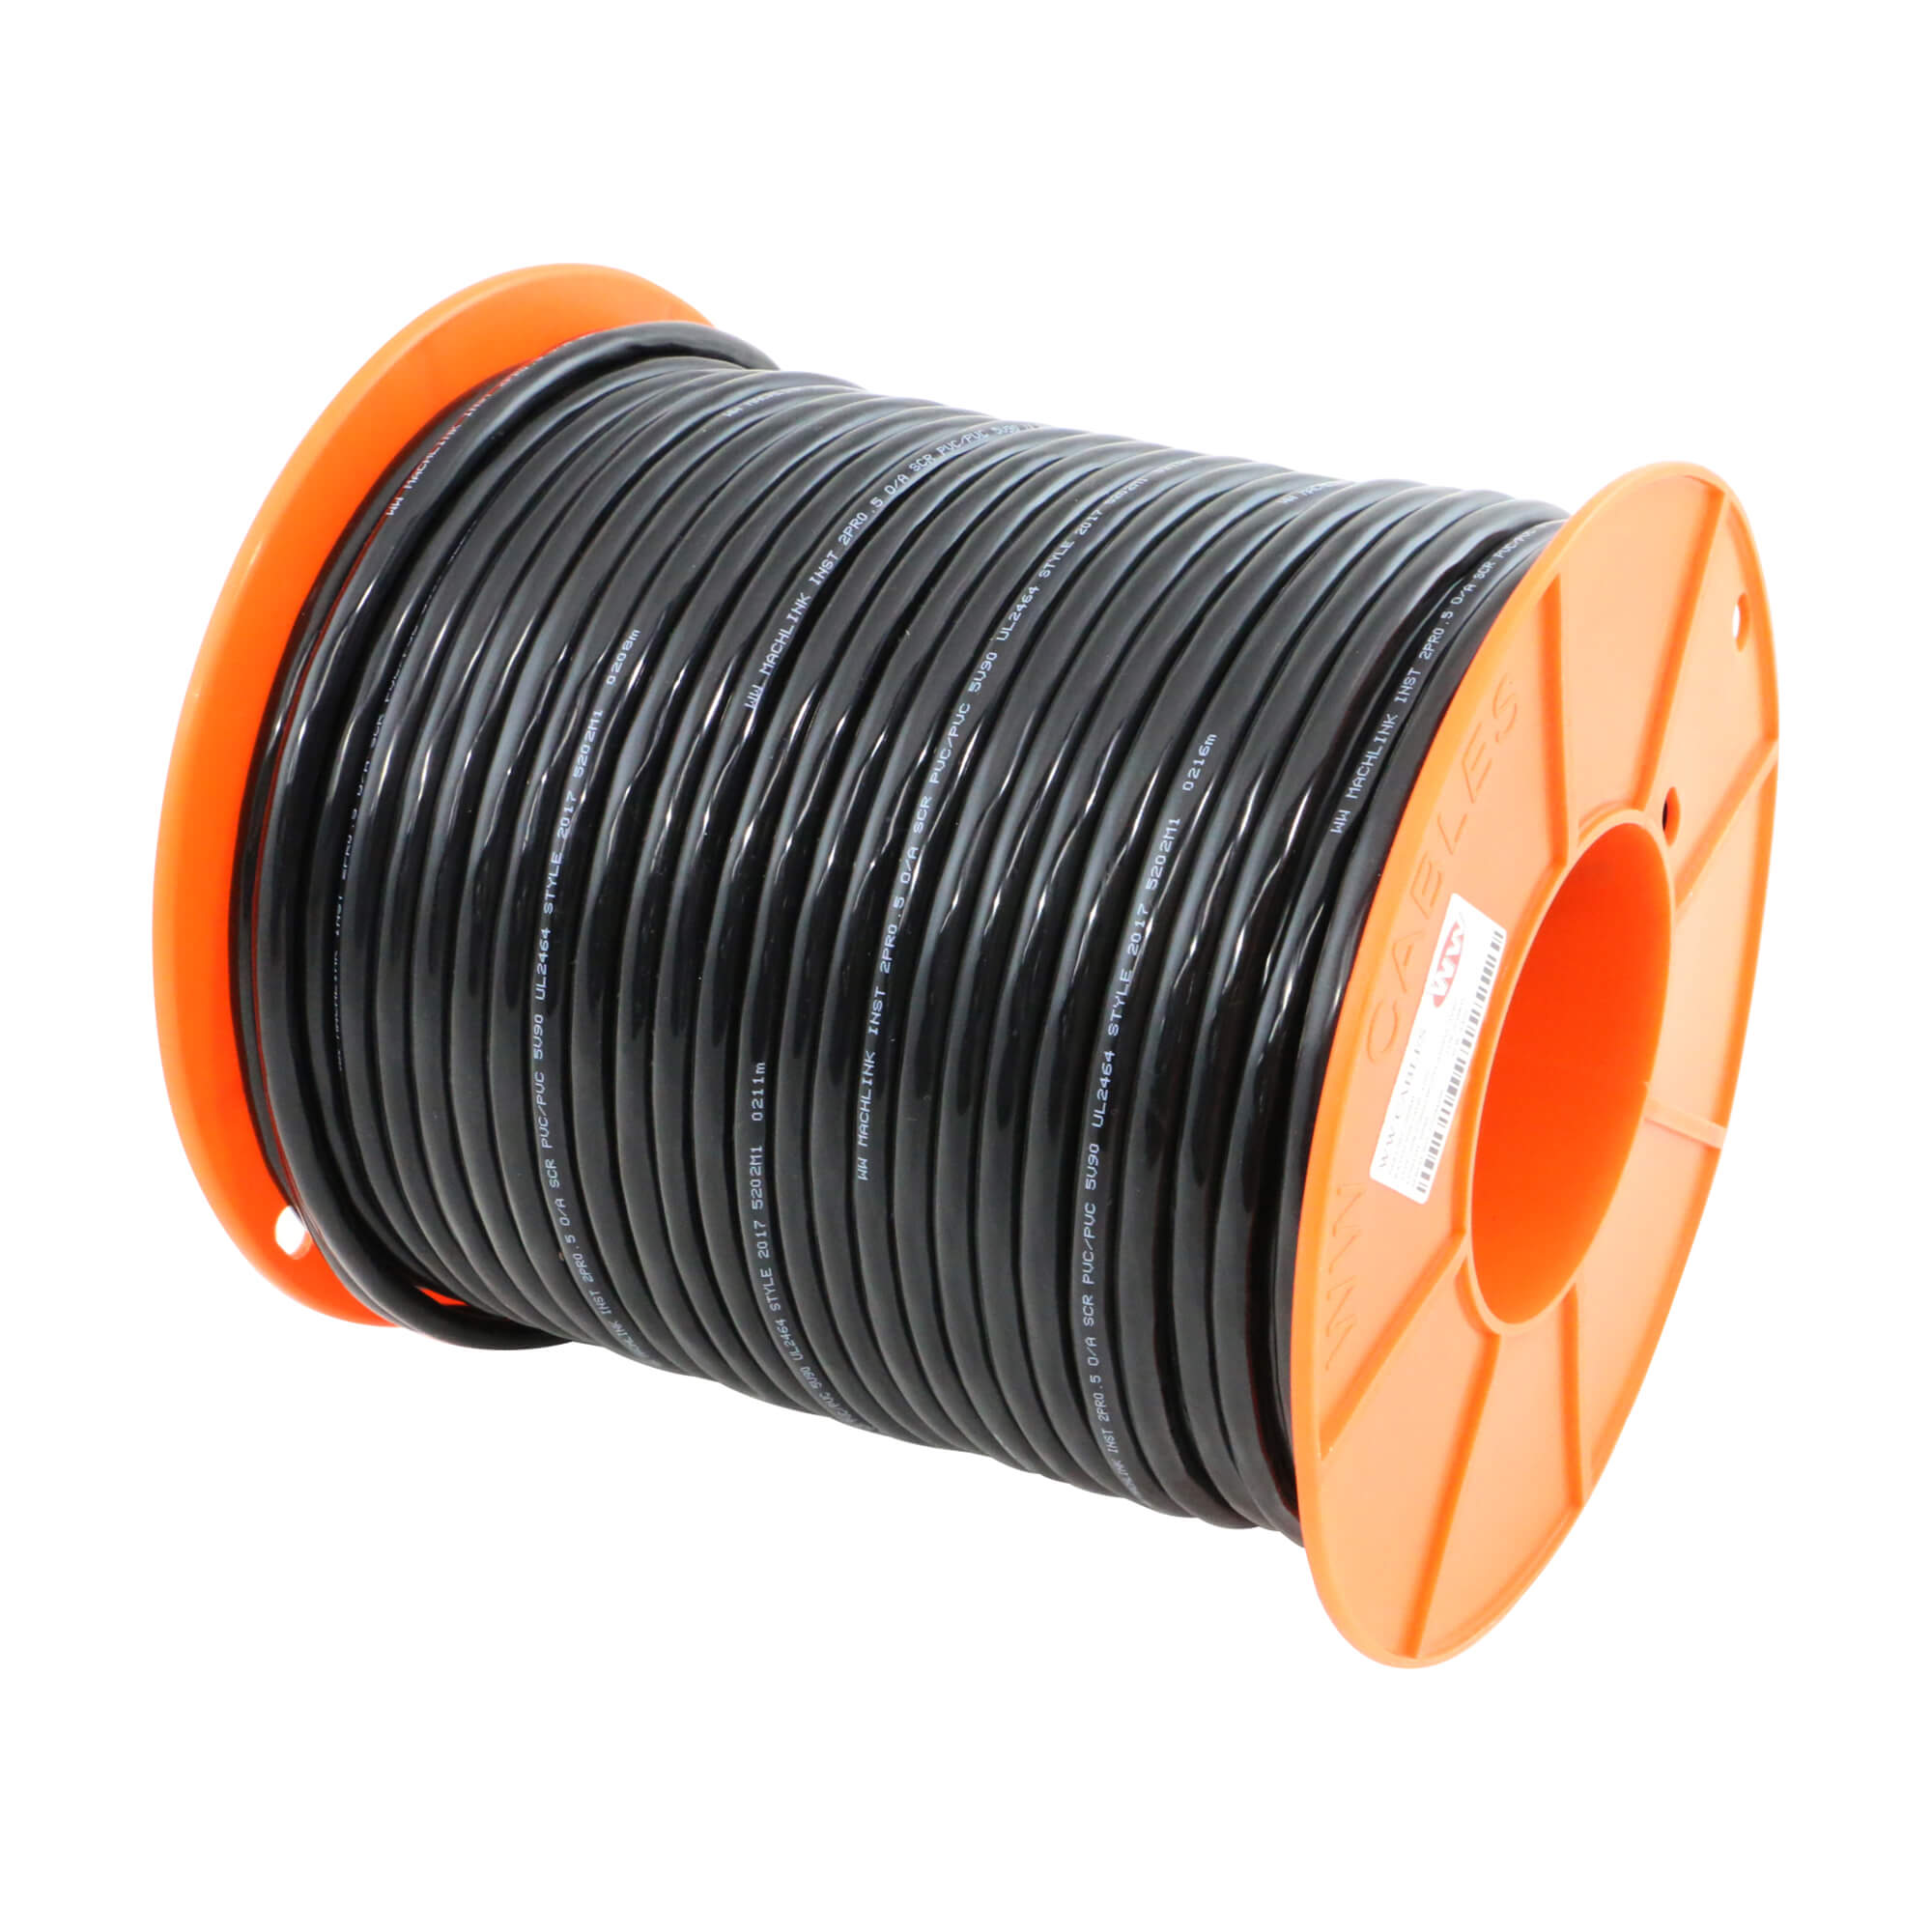 0.2 mm 1 Pair Overall Screened Cable, 100 m roll